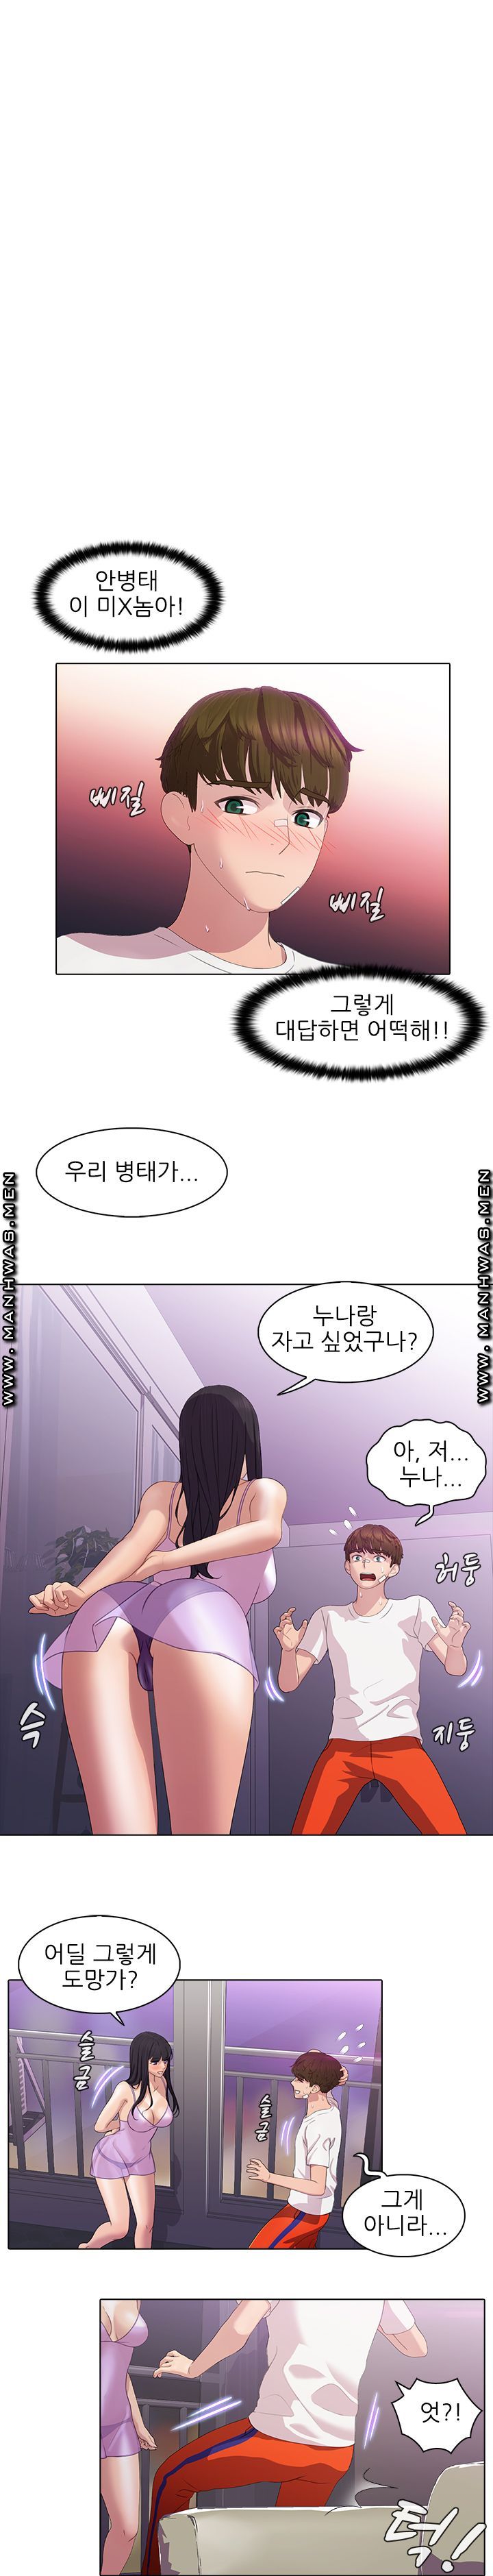 Sister's Friend Raw - Chapter 3 Page 2